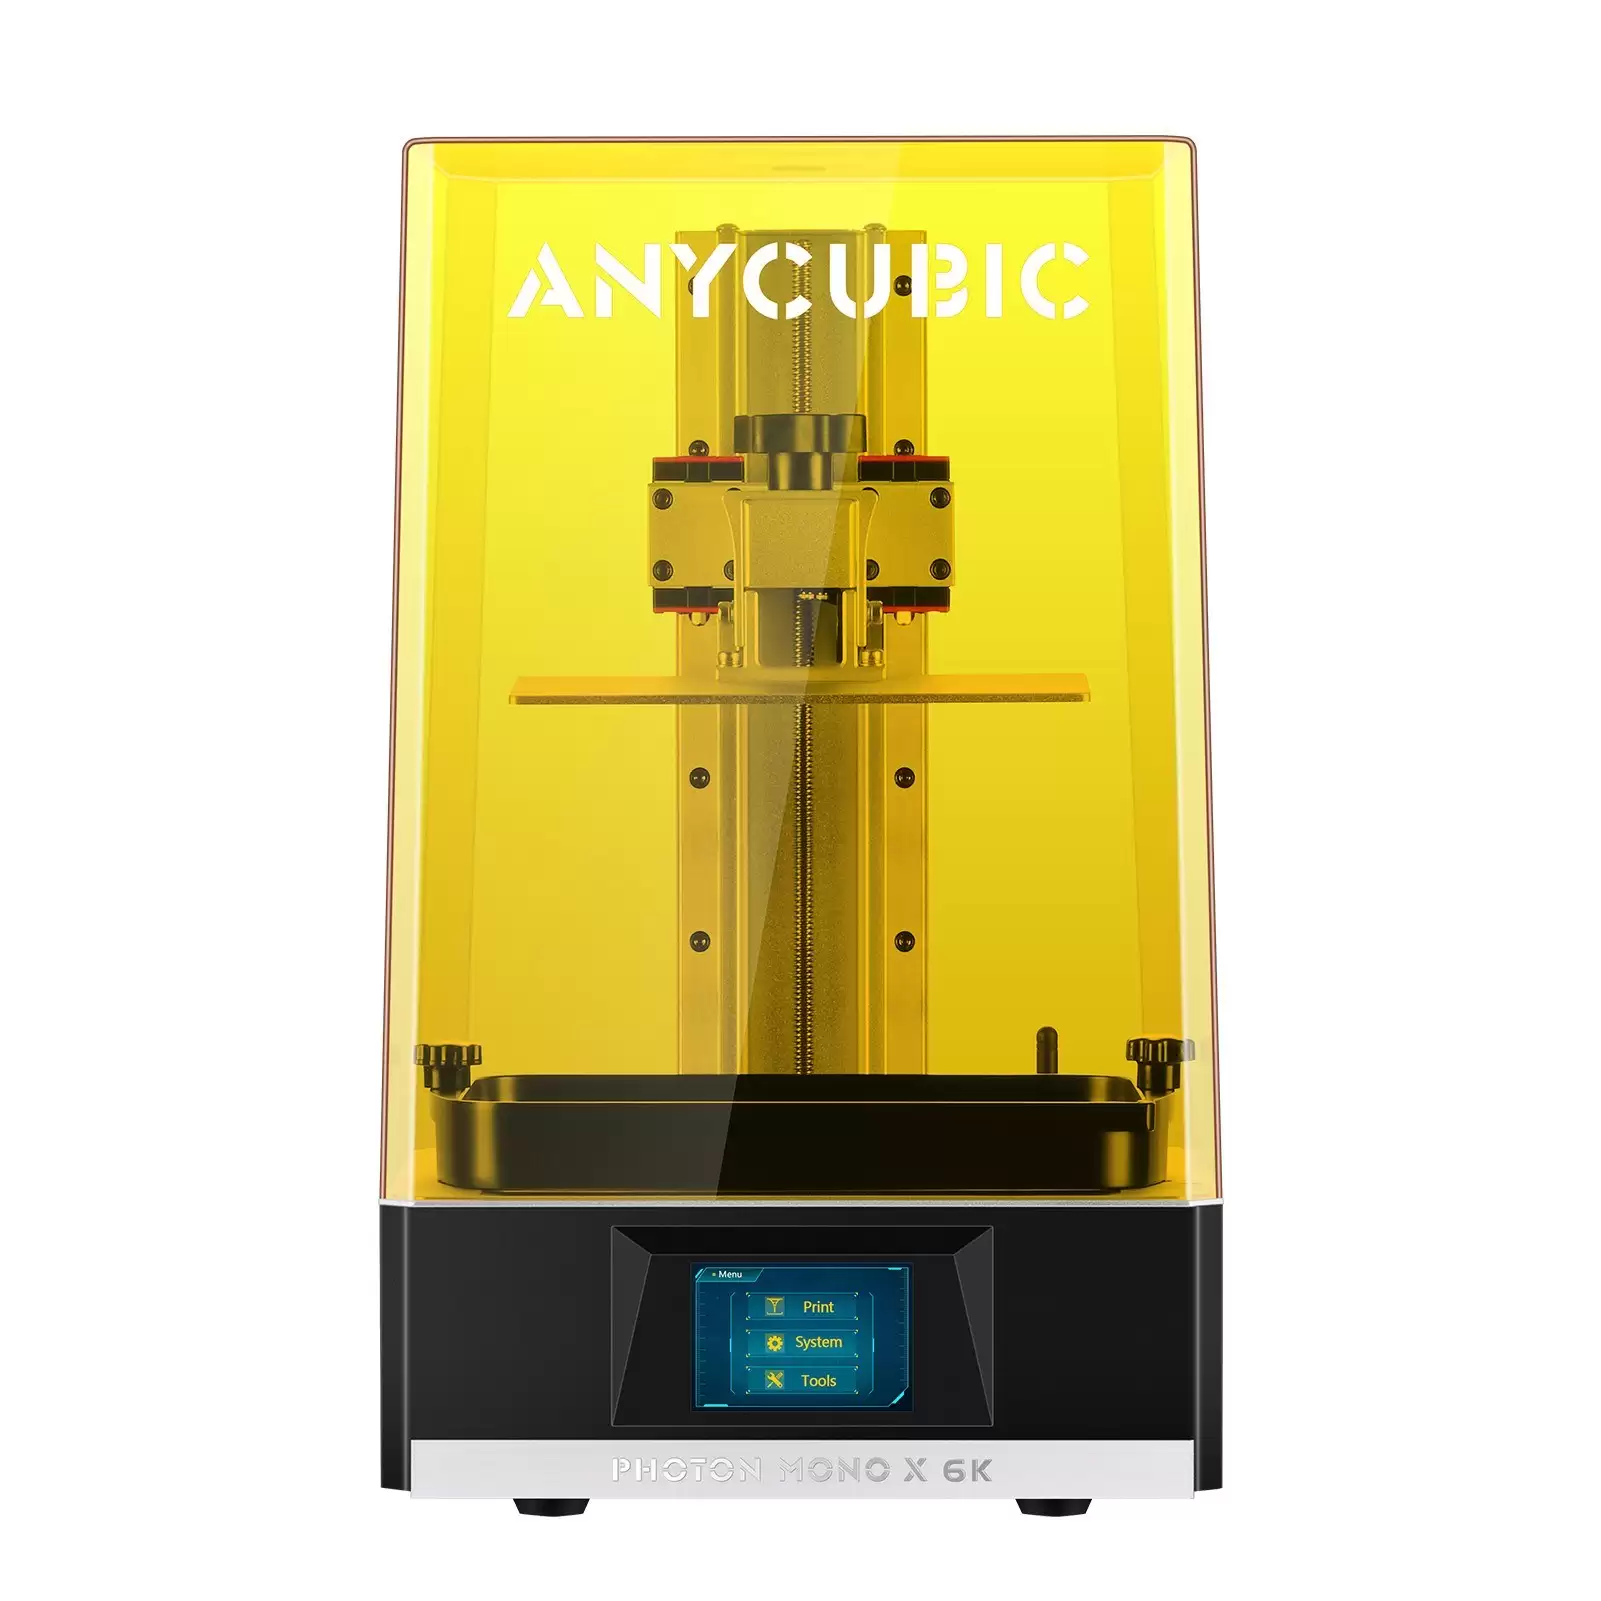 Order In Just $824.14 Anycubic Photon Mono X 6k Resin 3d Printer Using This Tomtop Discount Code